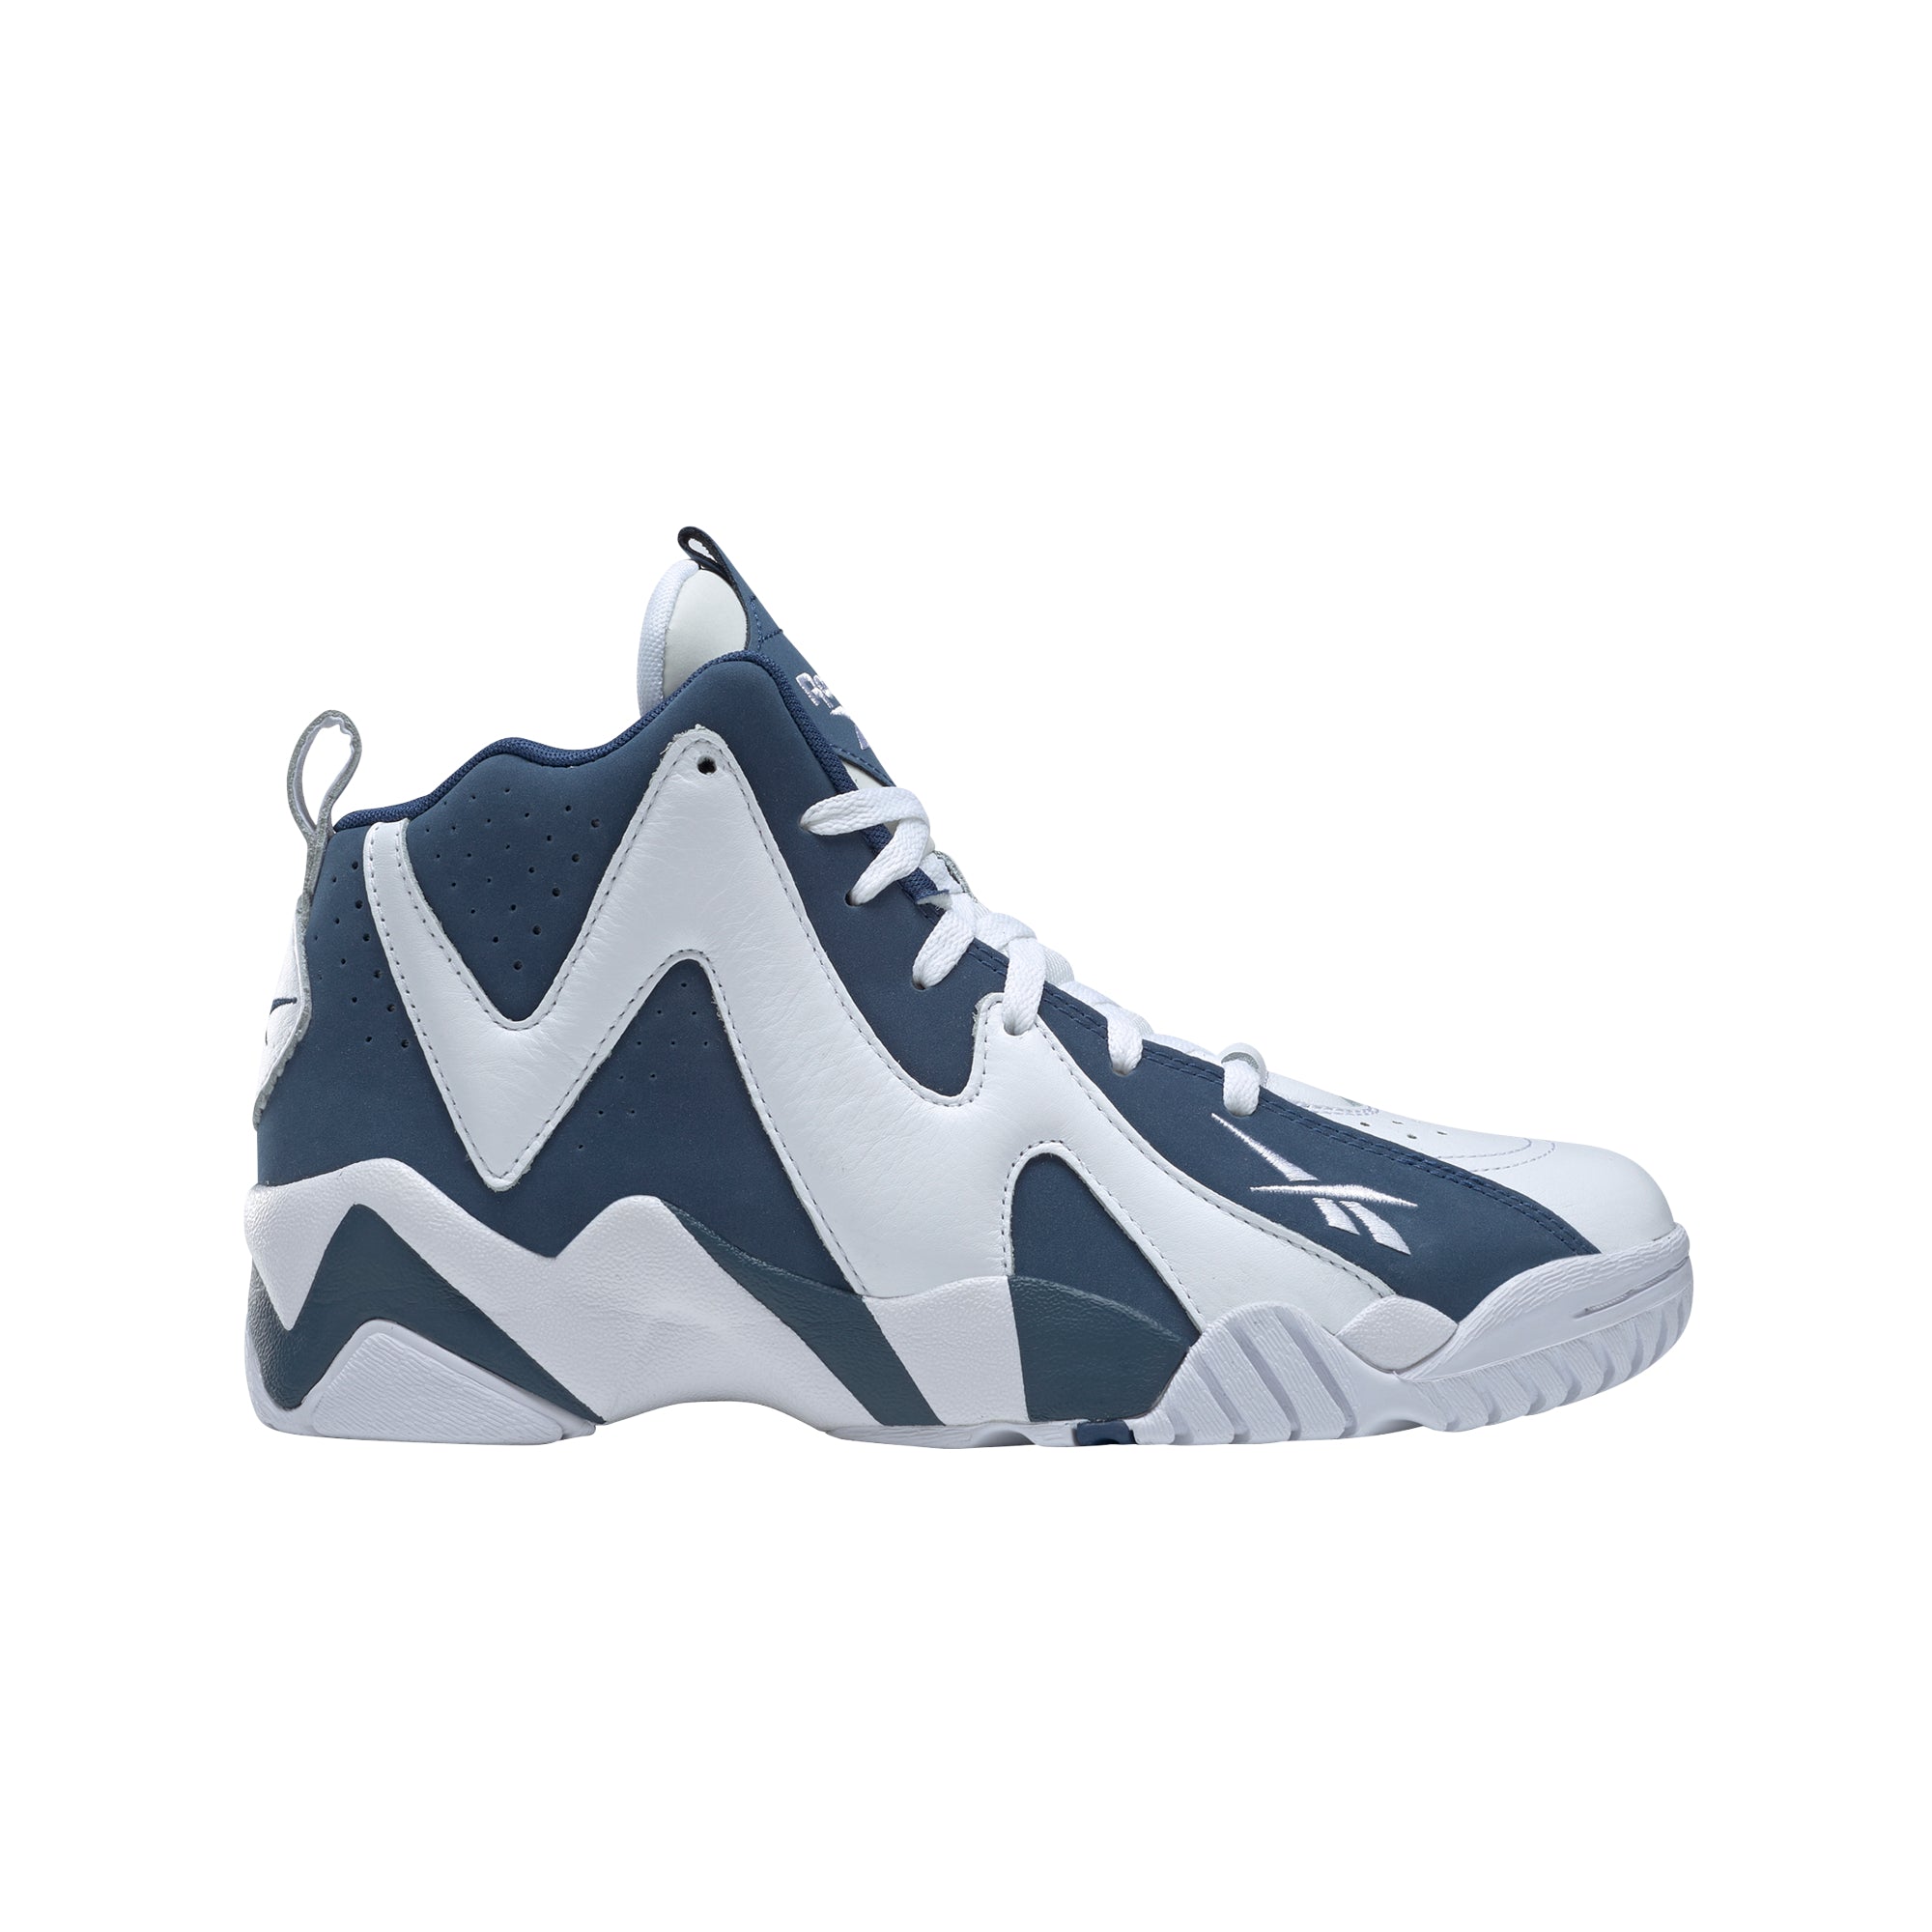 Reebok Kamikaze II Blue & White Tennis Shoes at In Style –